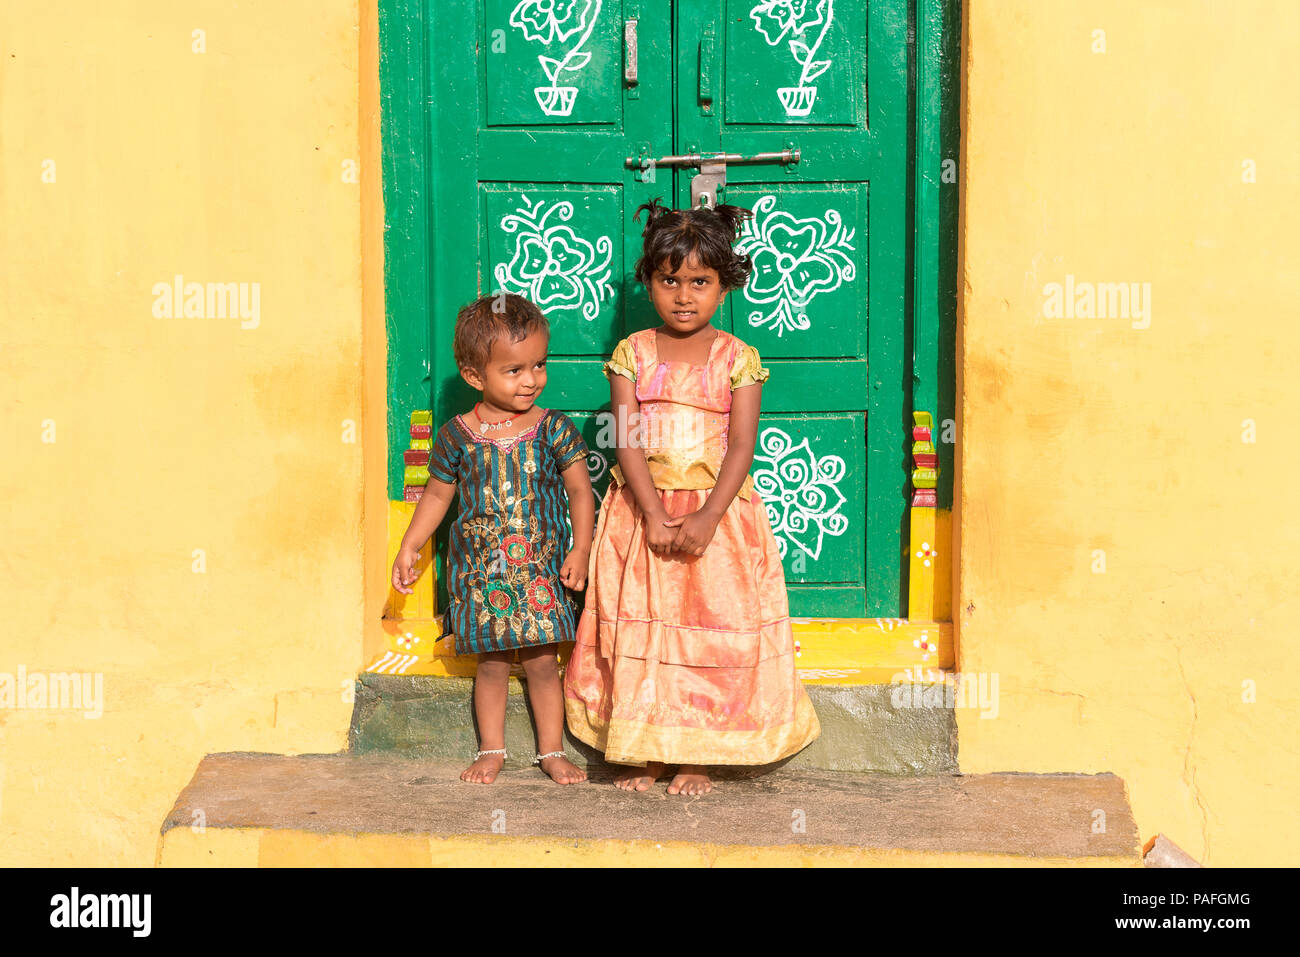 PUTTAPARTHI, ANDHRA PRADESH, INDIA - JULY 9, 2017: Two little indian girls on the doorstep of a house. Copy space for text Stock Photo